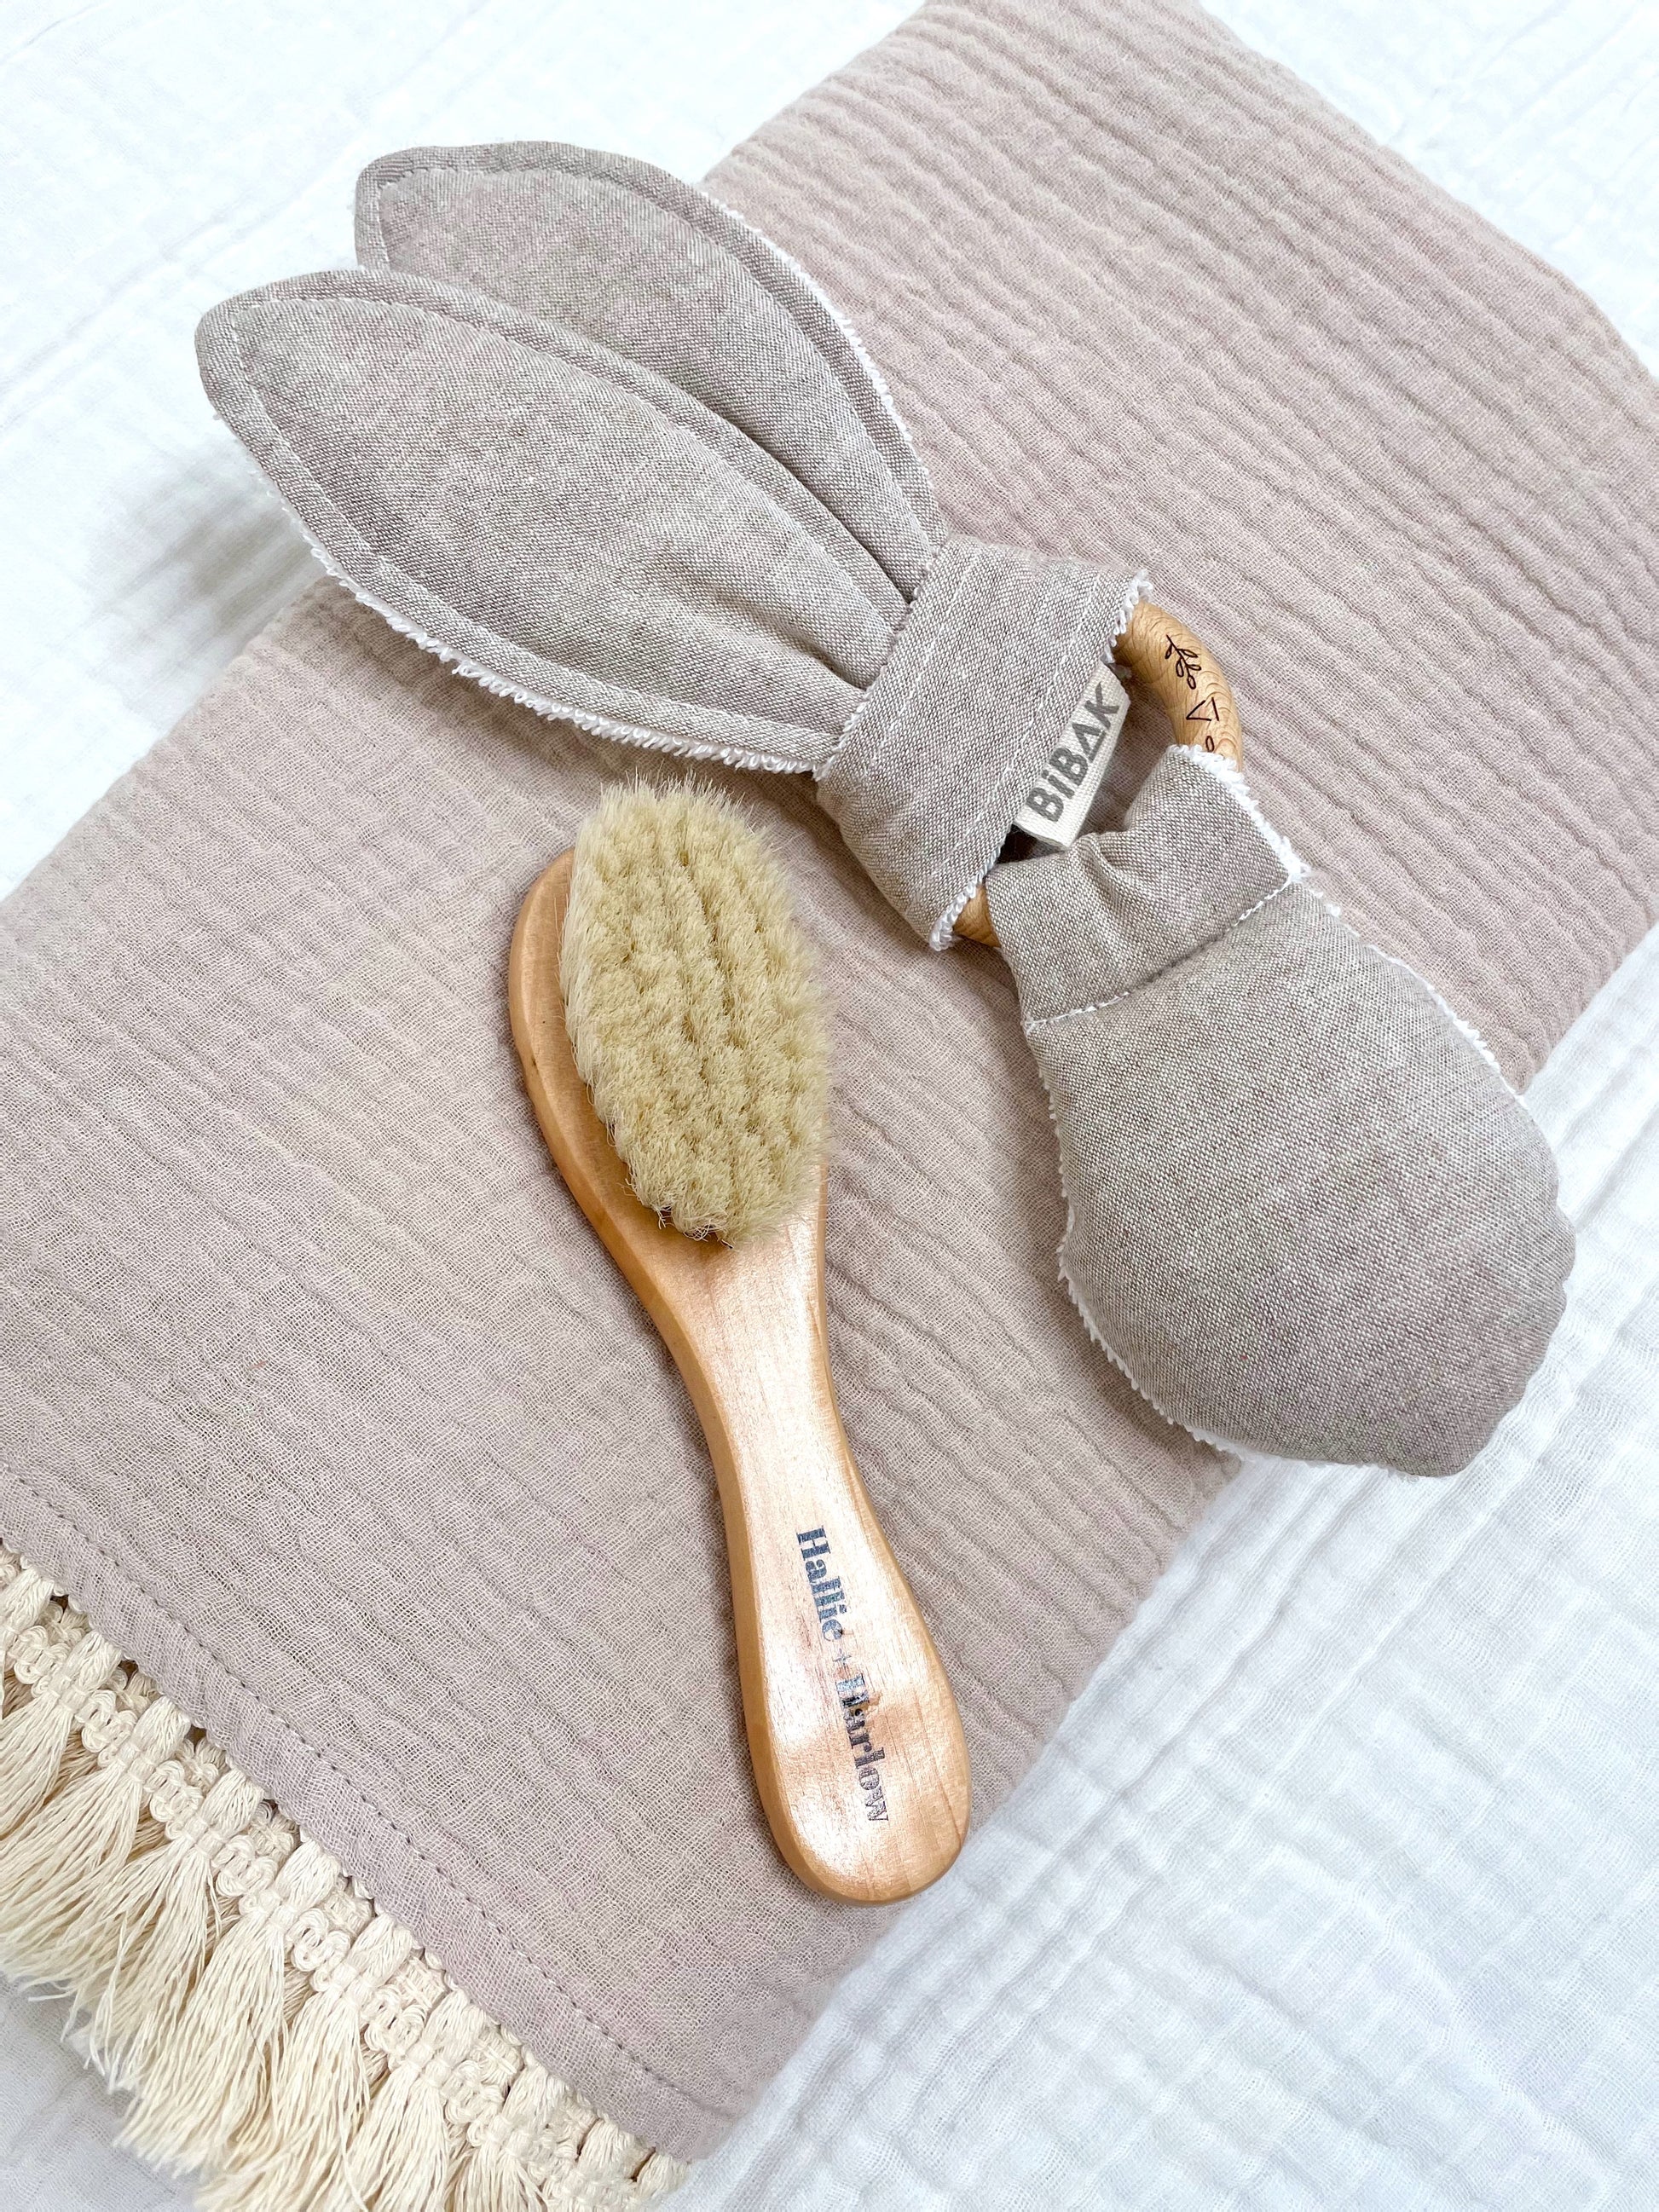 beige blanket, folded up, with a baby soft bristle hairbrush and a greige rabbit rattle/teether on top